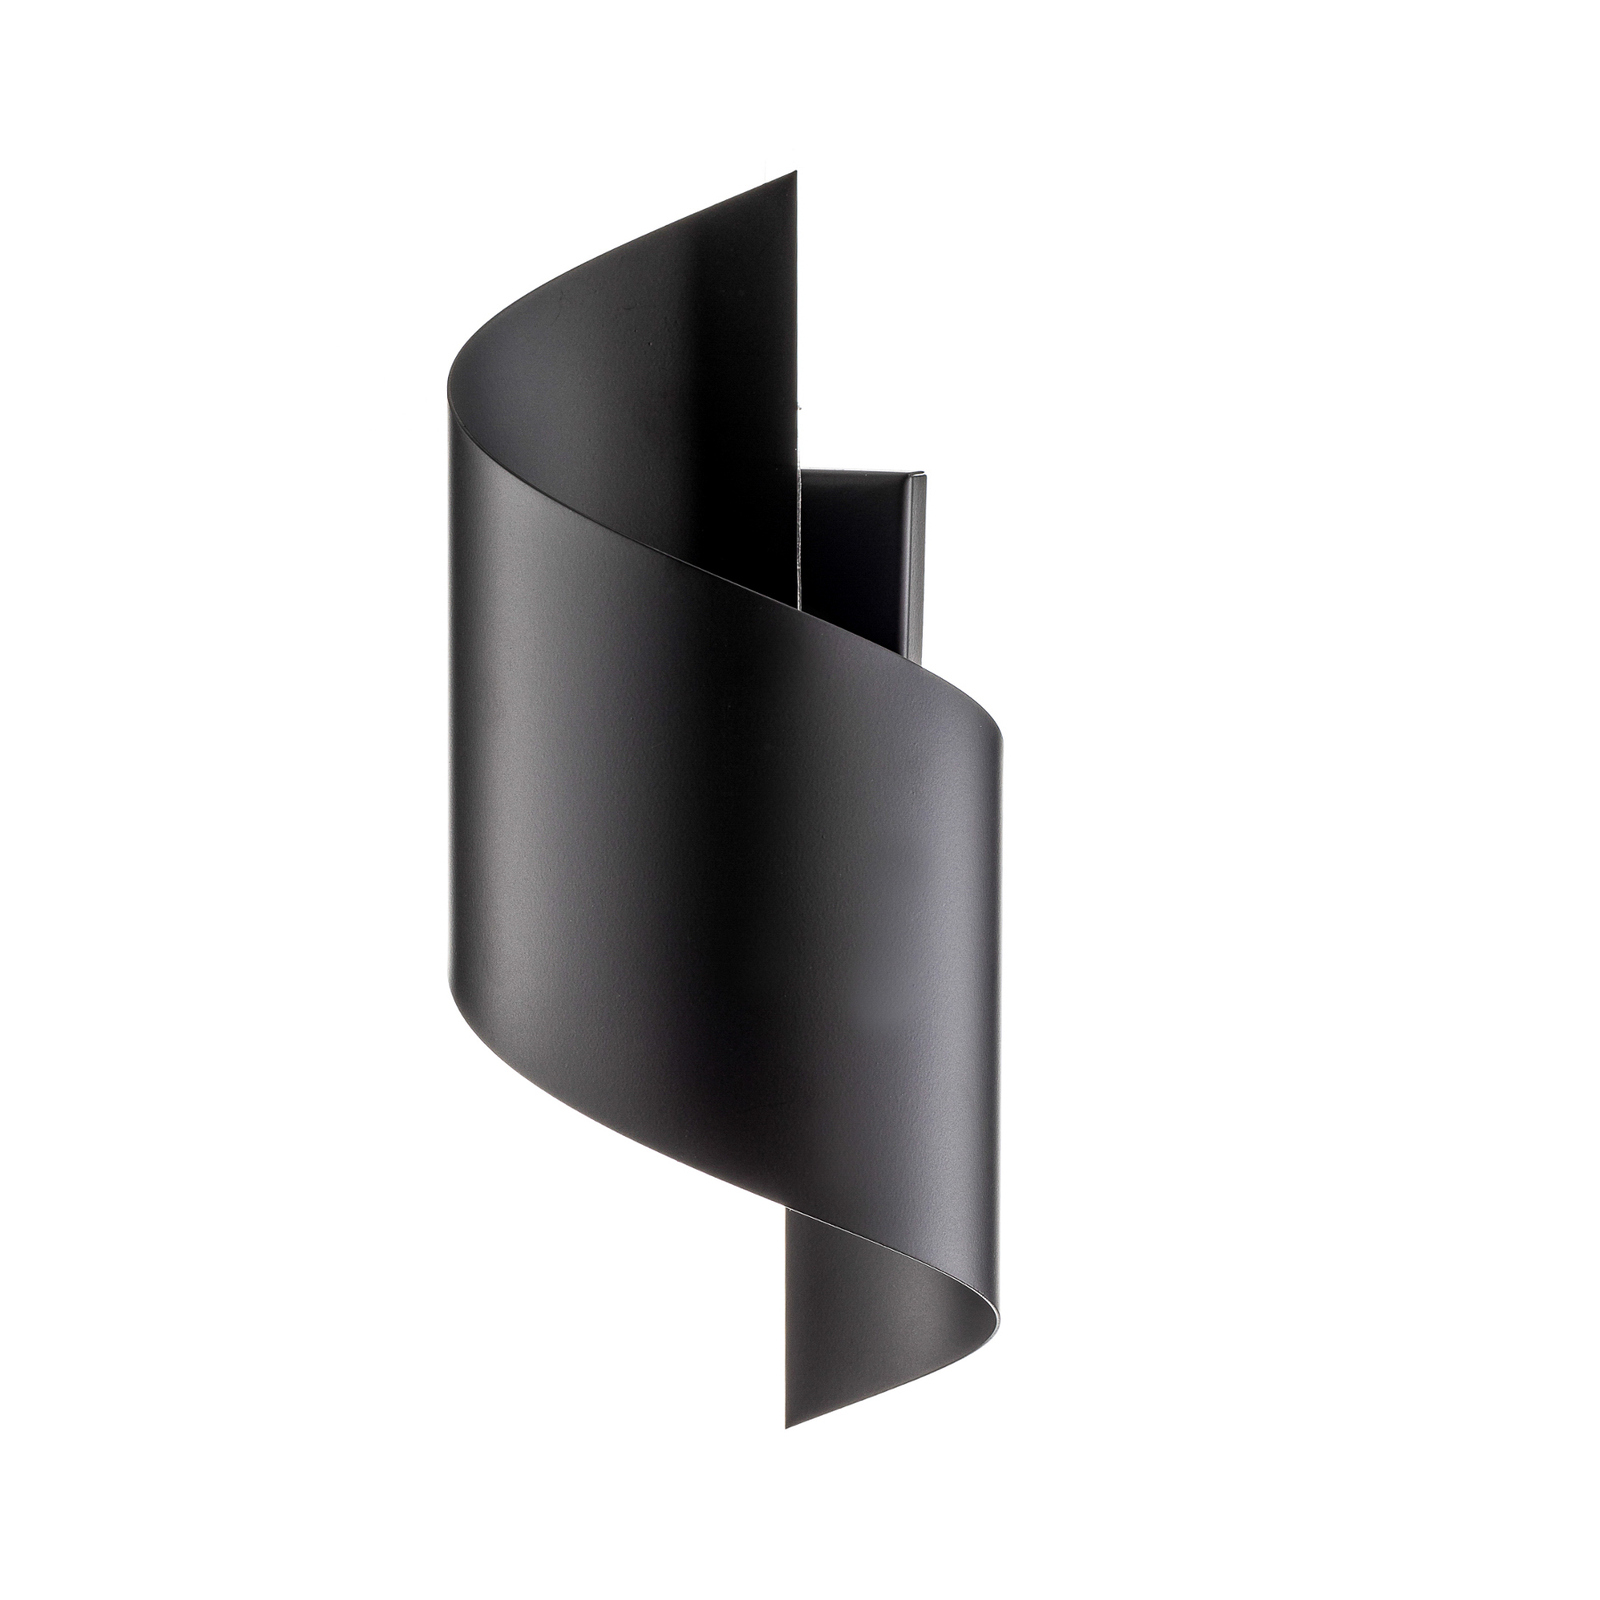 Spiner wall light in the shape of a spiral, black